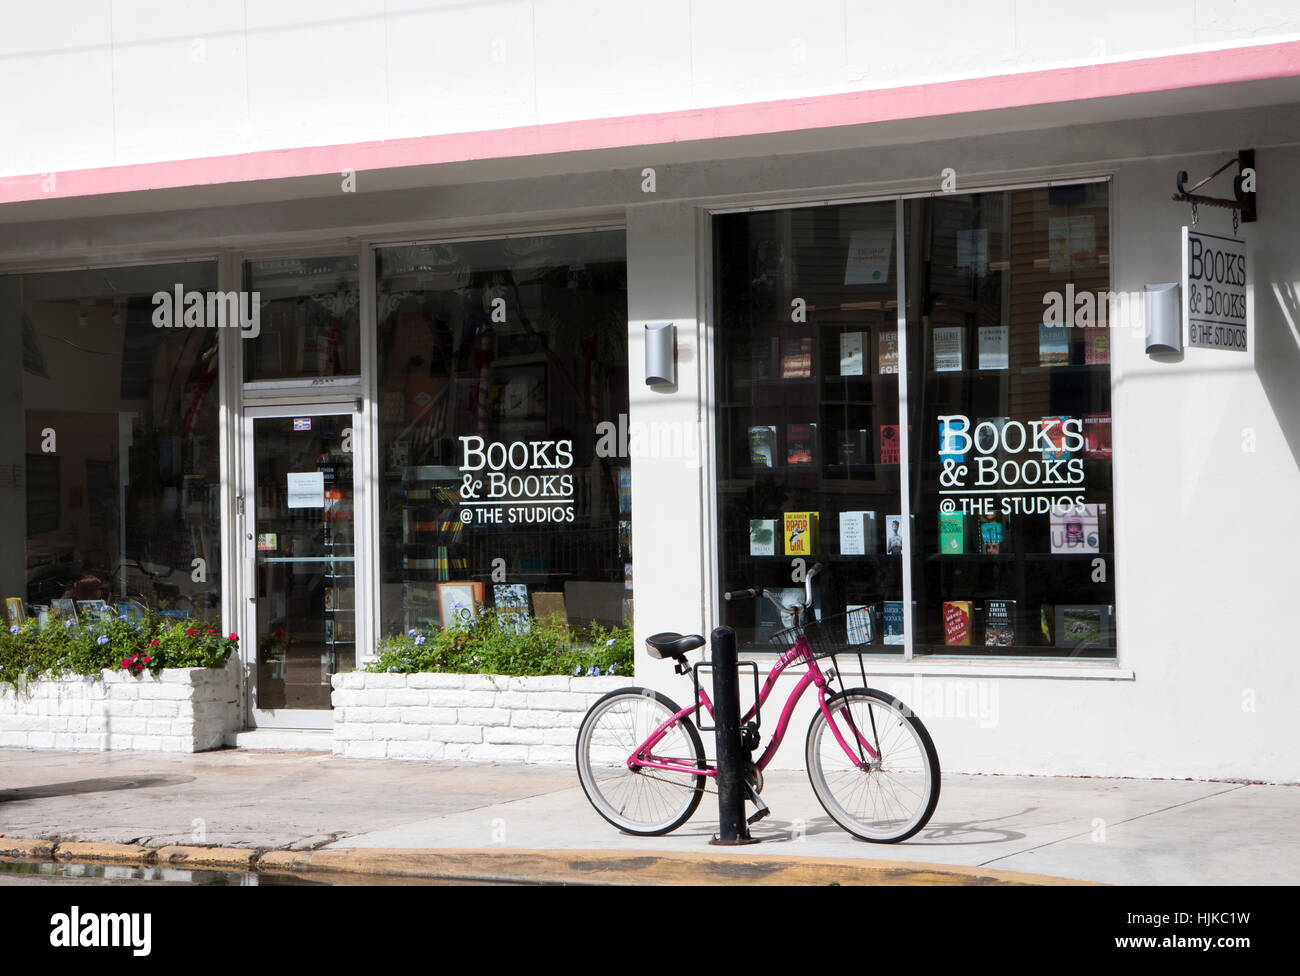 Books & Books, an independent bookstore owned by author Judy Blume in Key West, Florida. Stock Photo